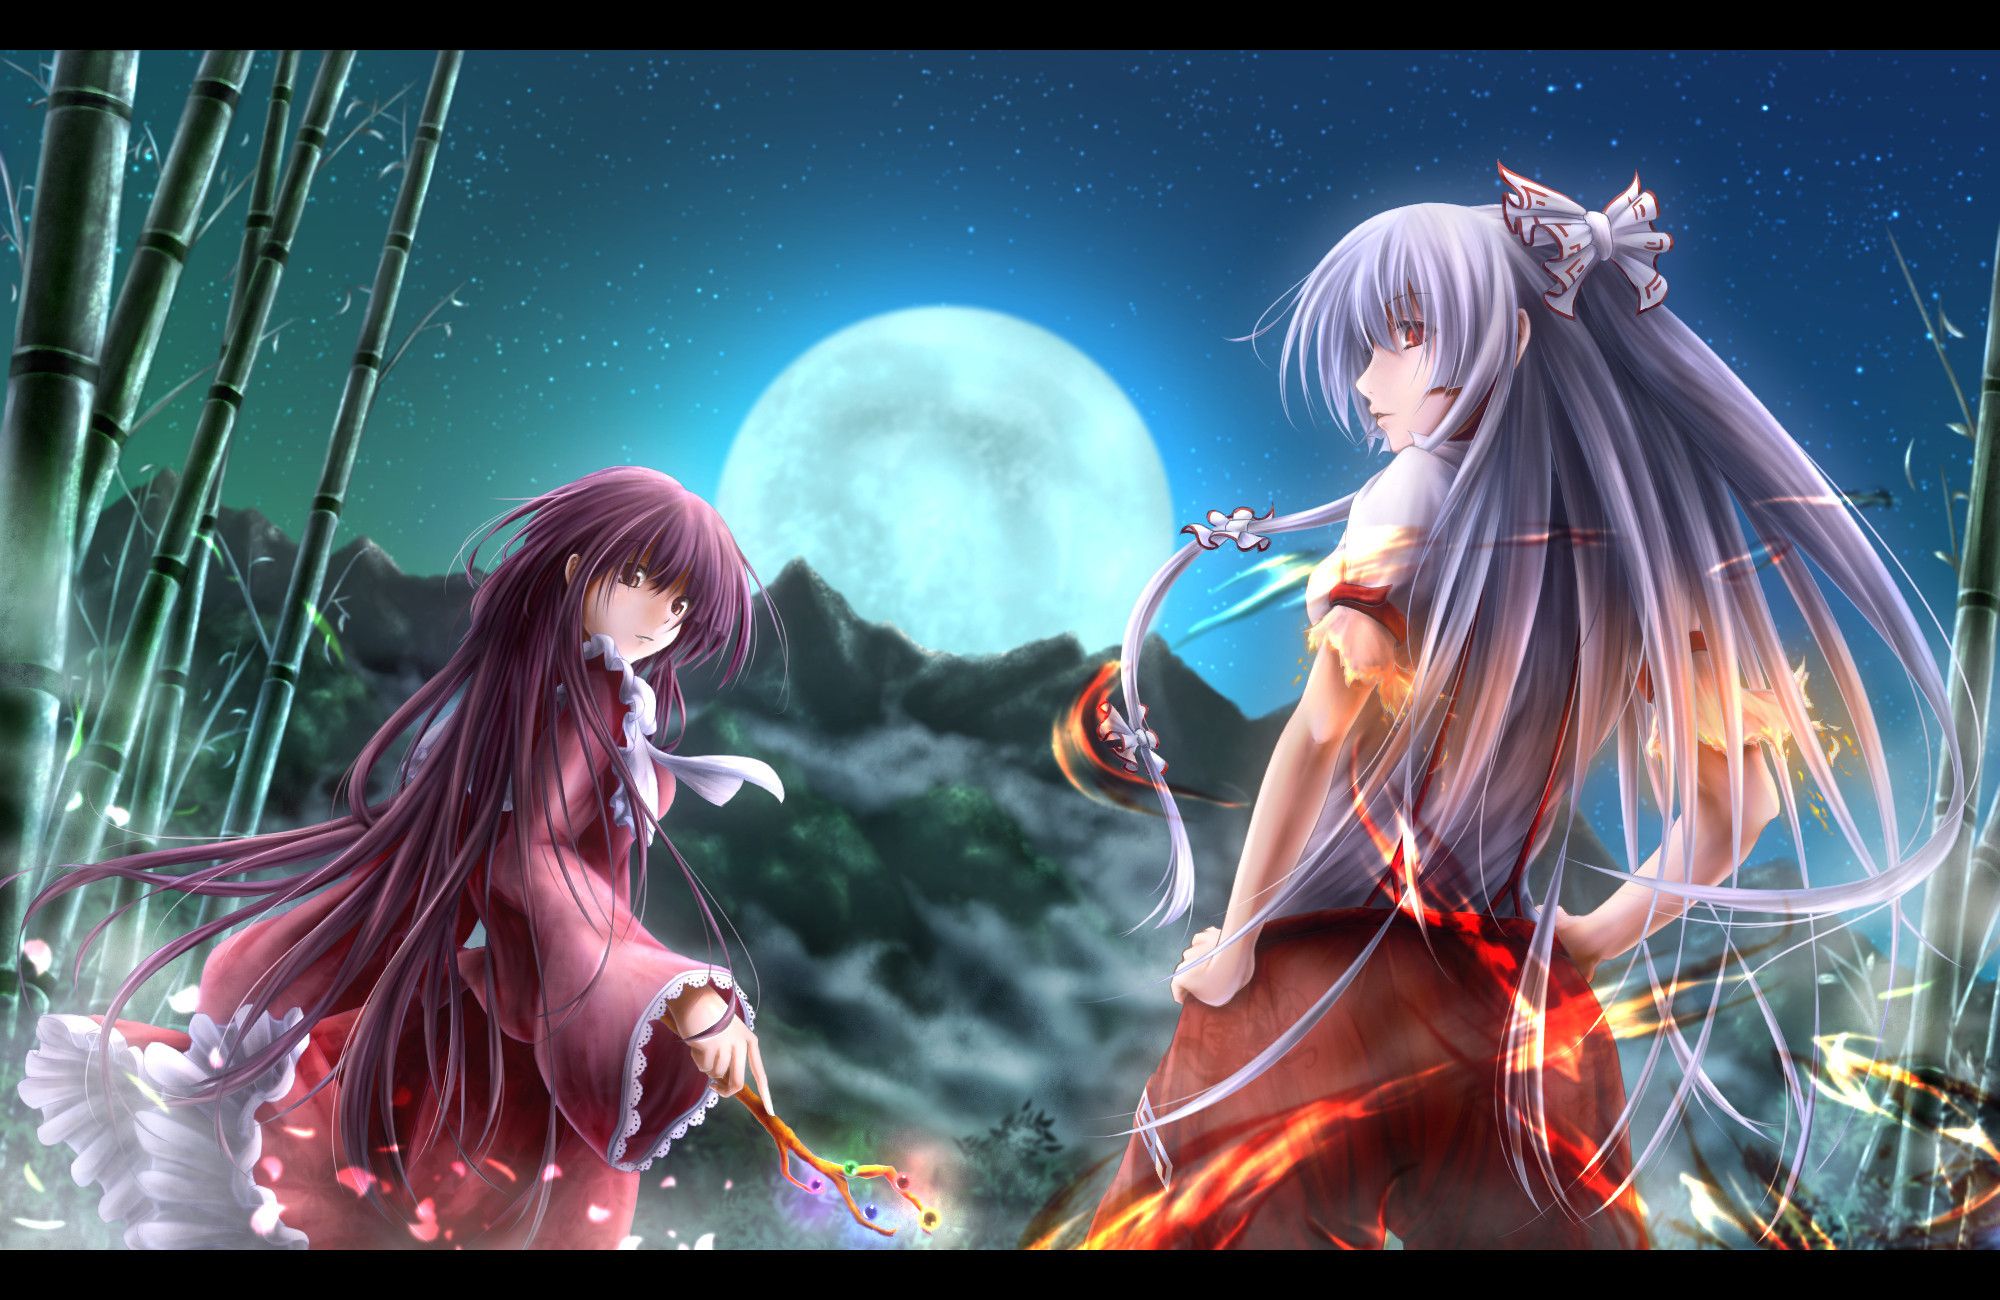 Touhou wallpaper; all are in good taste, most are epic. If